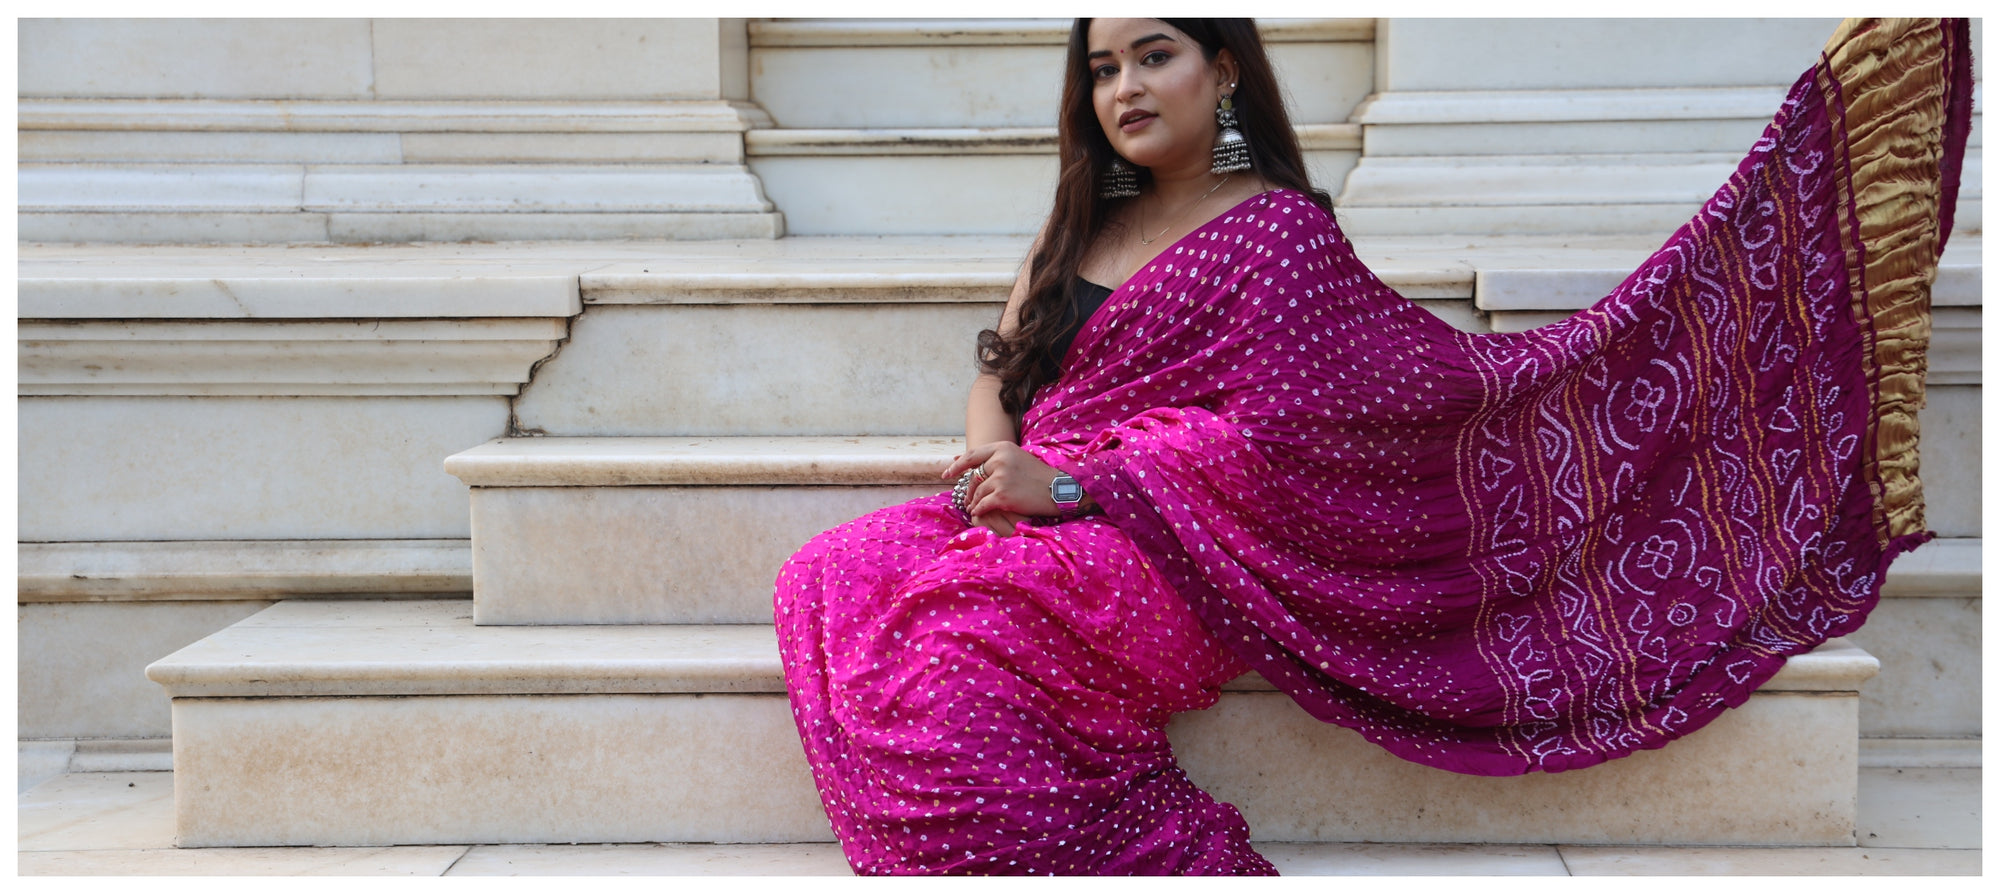 Rich Heritage of Bandhani Dupattas: Tie-and-Dye Hand Embroidery